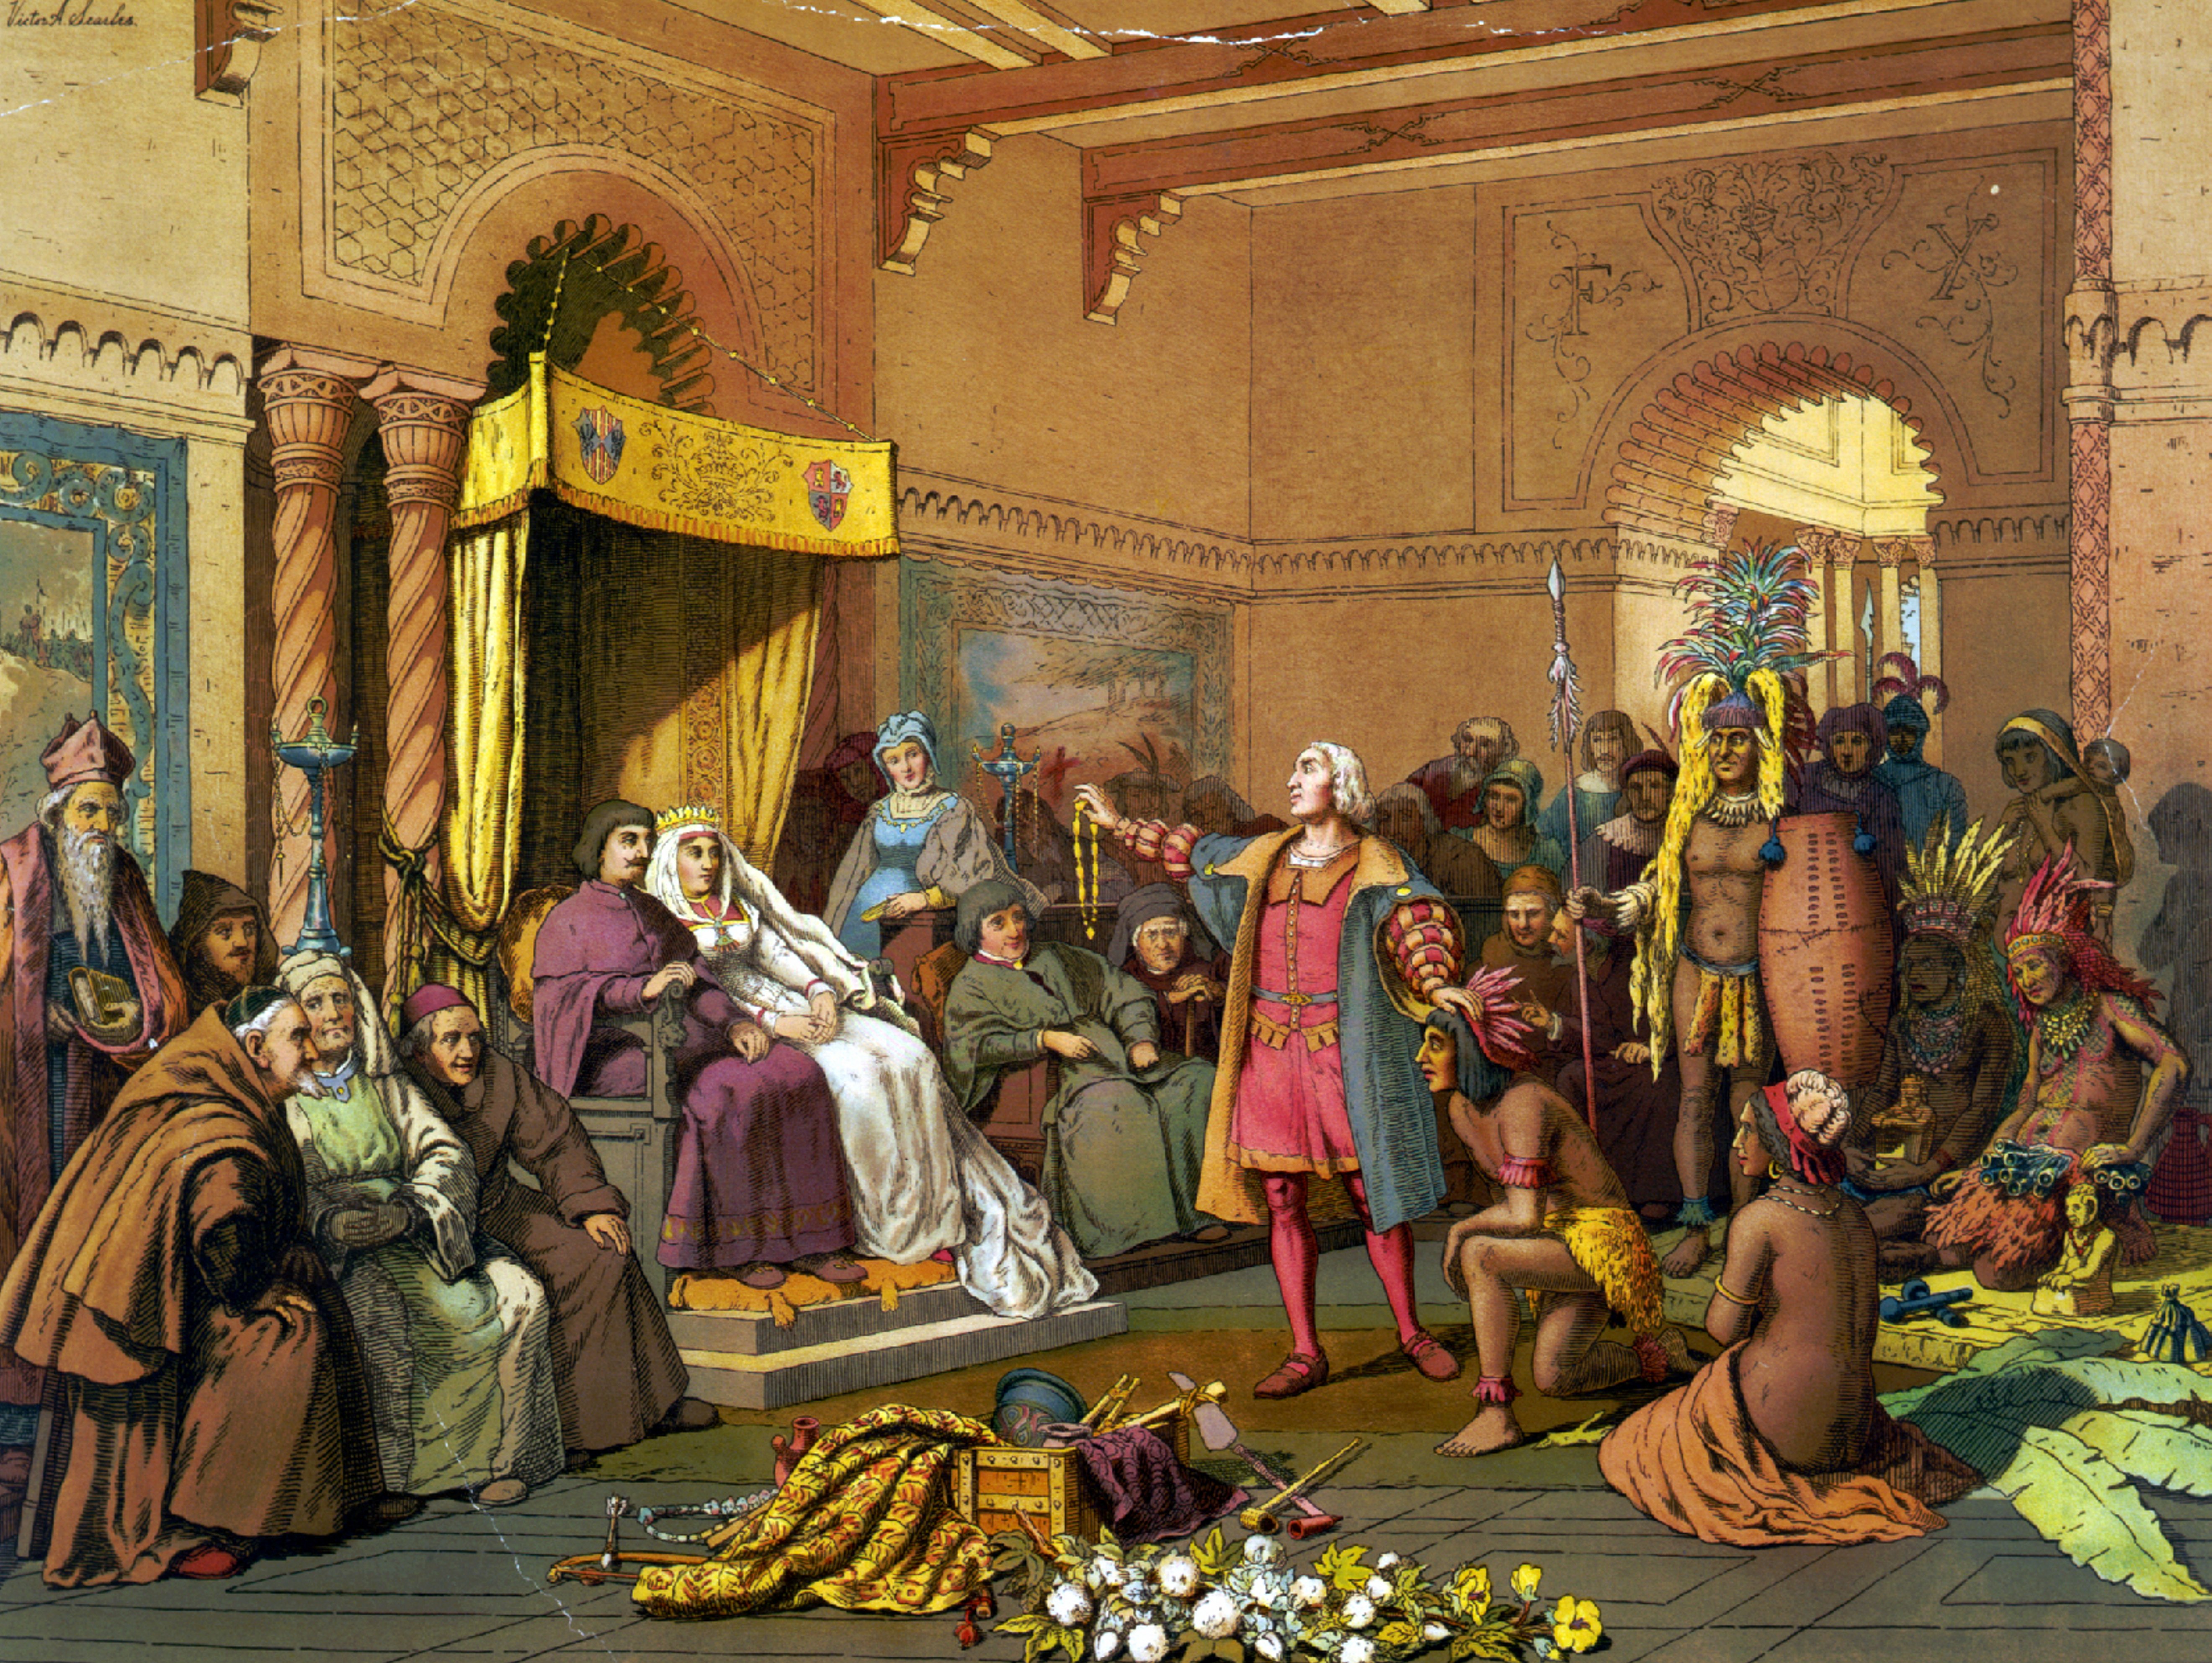 An illustration shows Christopher Columbus standing before the king and queen of Spain, presenting Indians and treasures from the New World in 1493 in Barcelona. (Newscom/World History Archive)